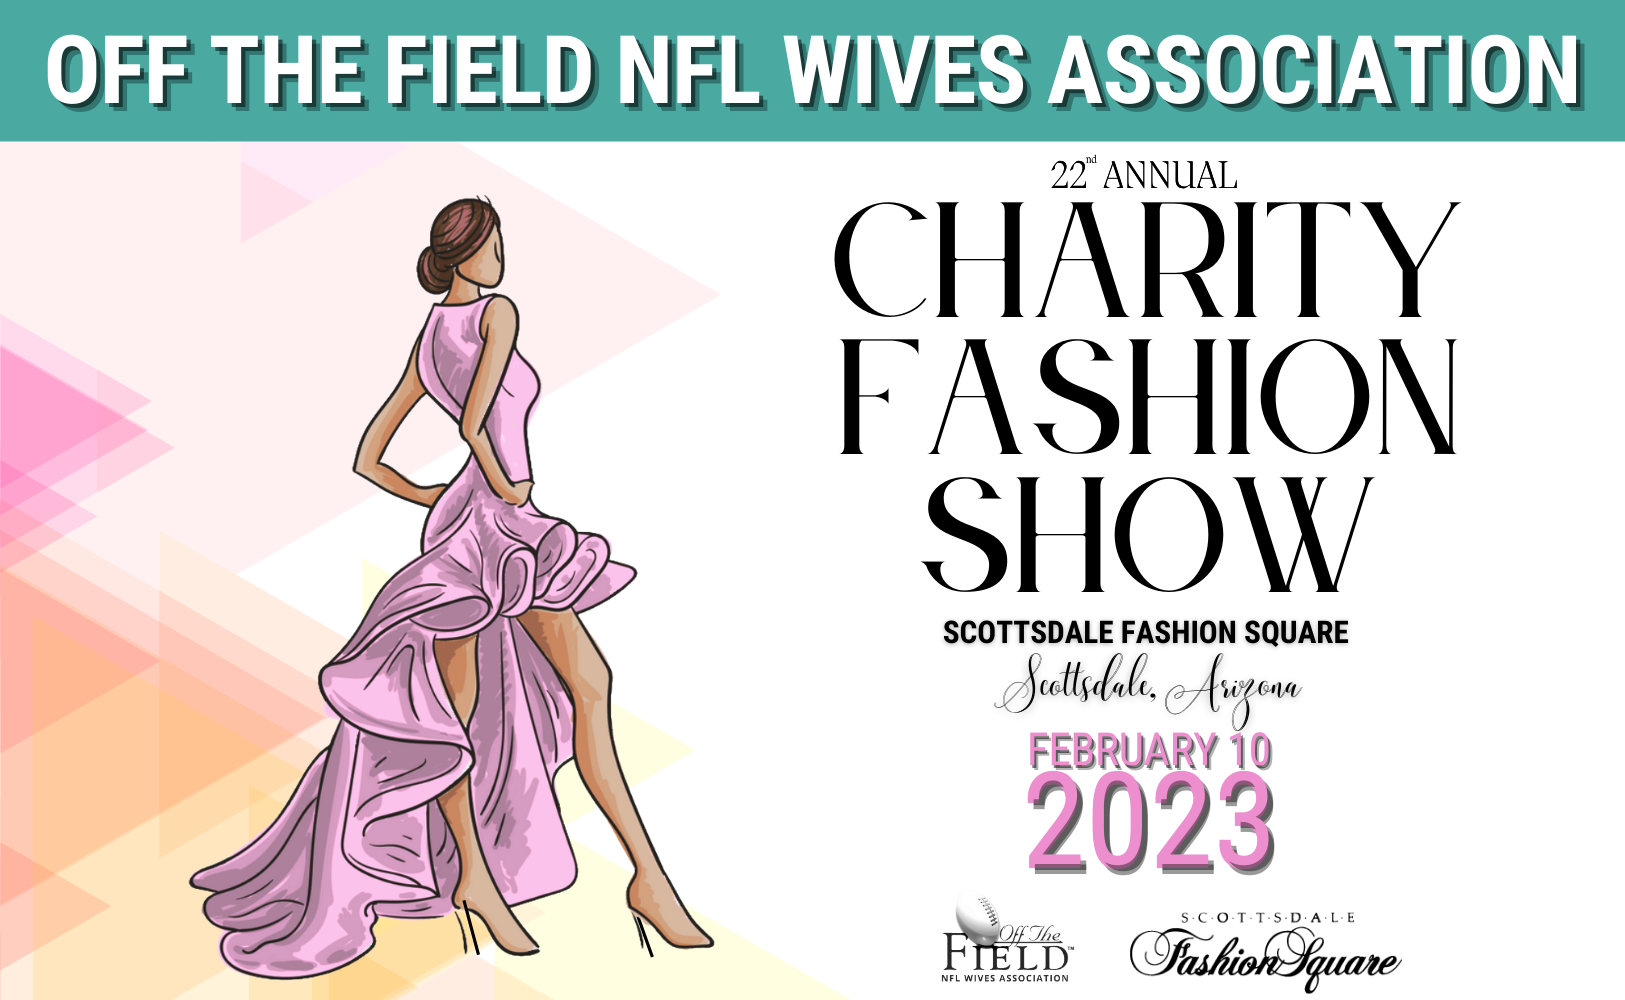 off the field nfl wives association. 22nd annual charity fashion show scottsdale fashion square scottsdale arizona. february 10 2023 